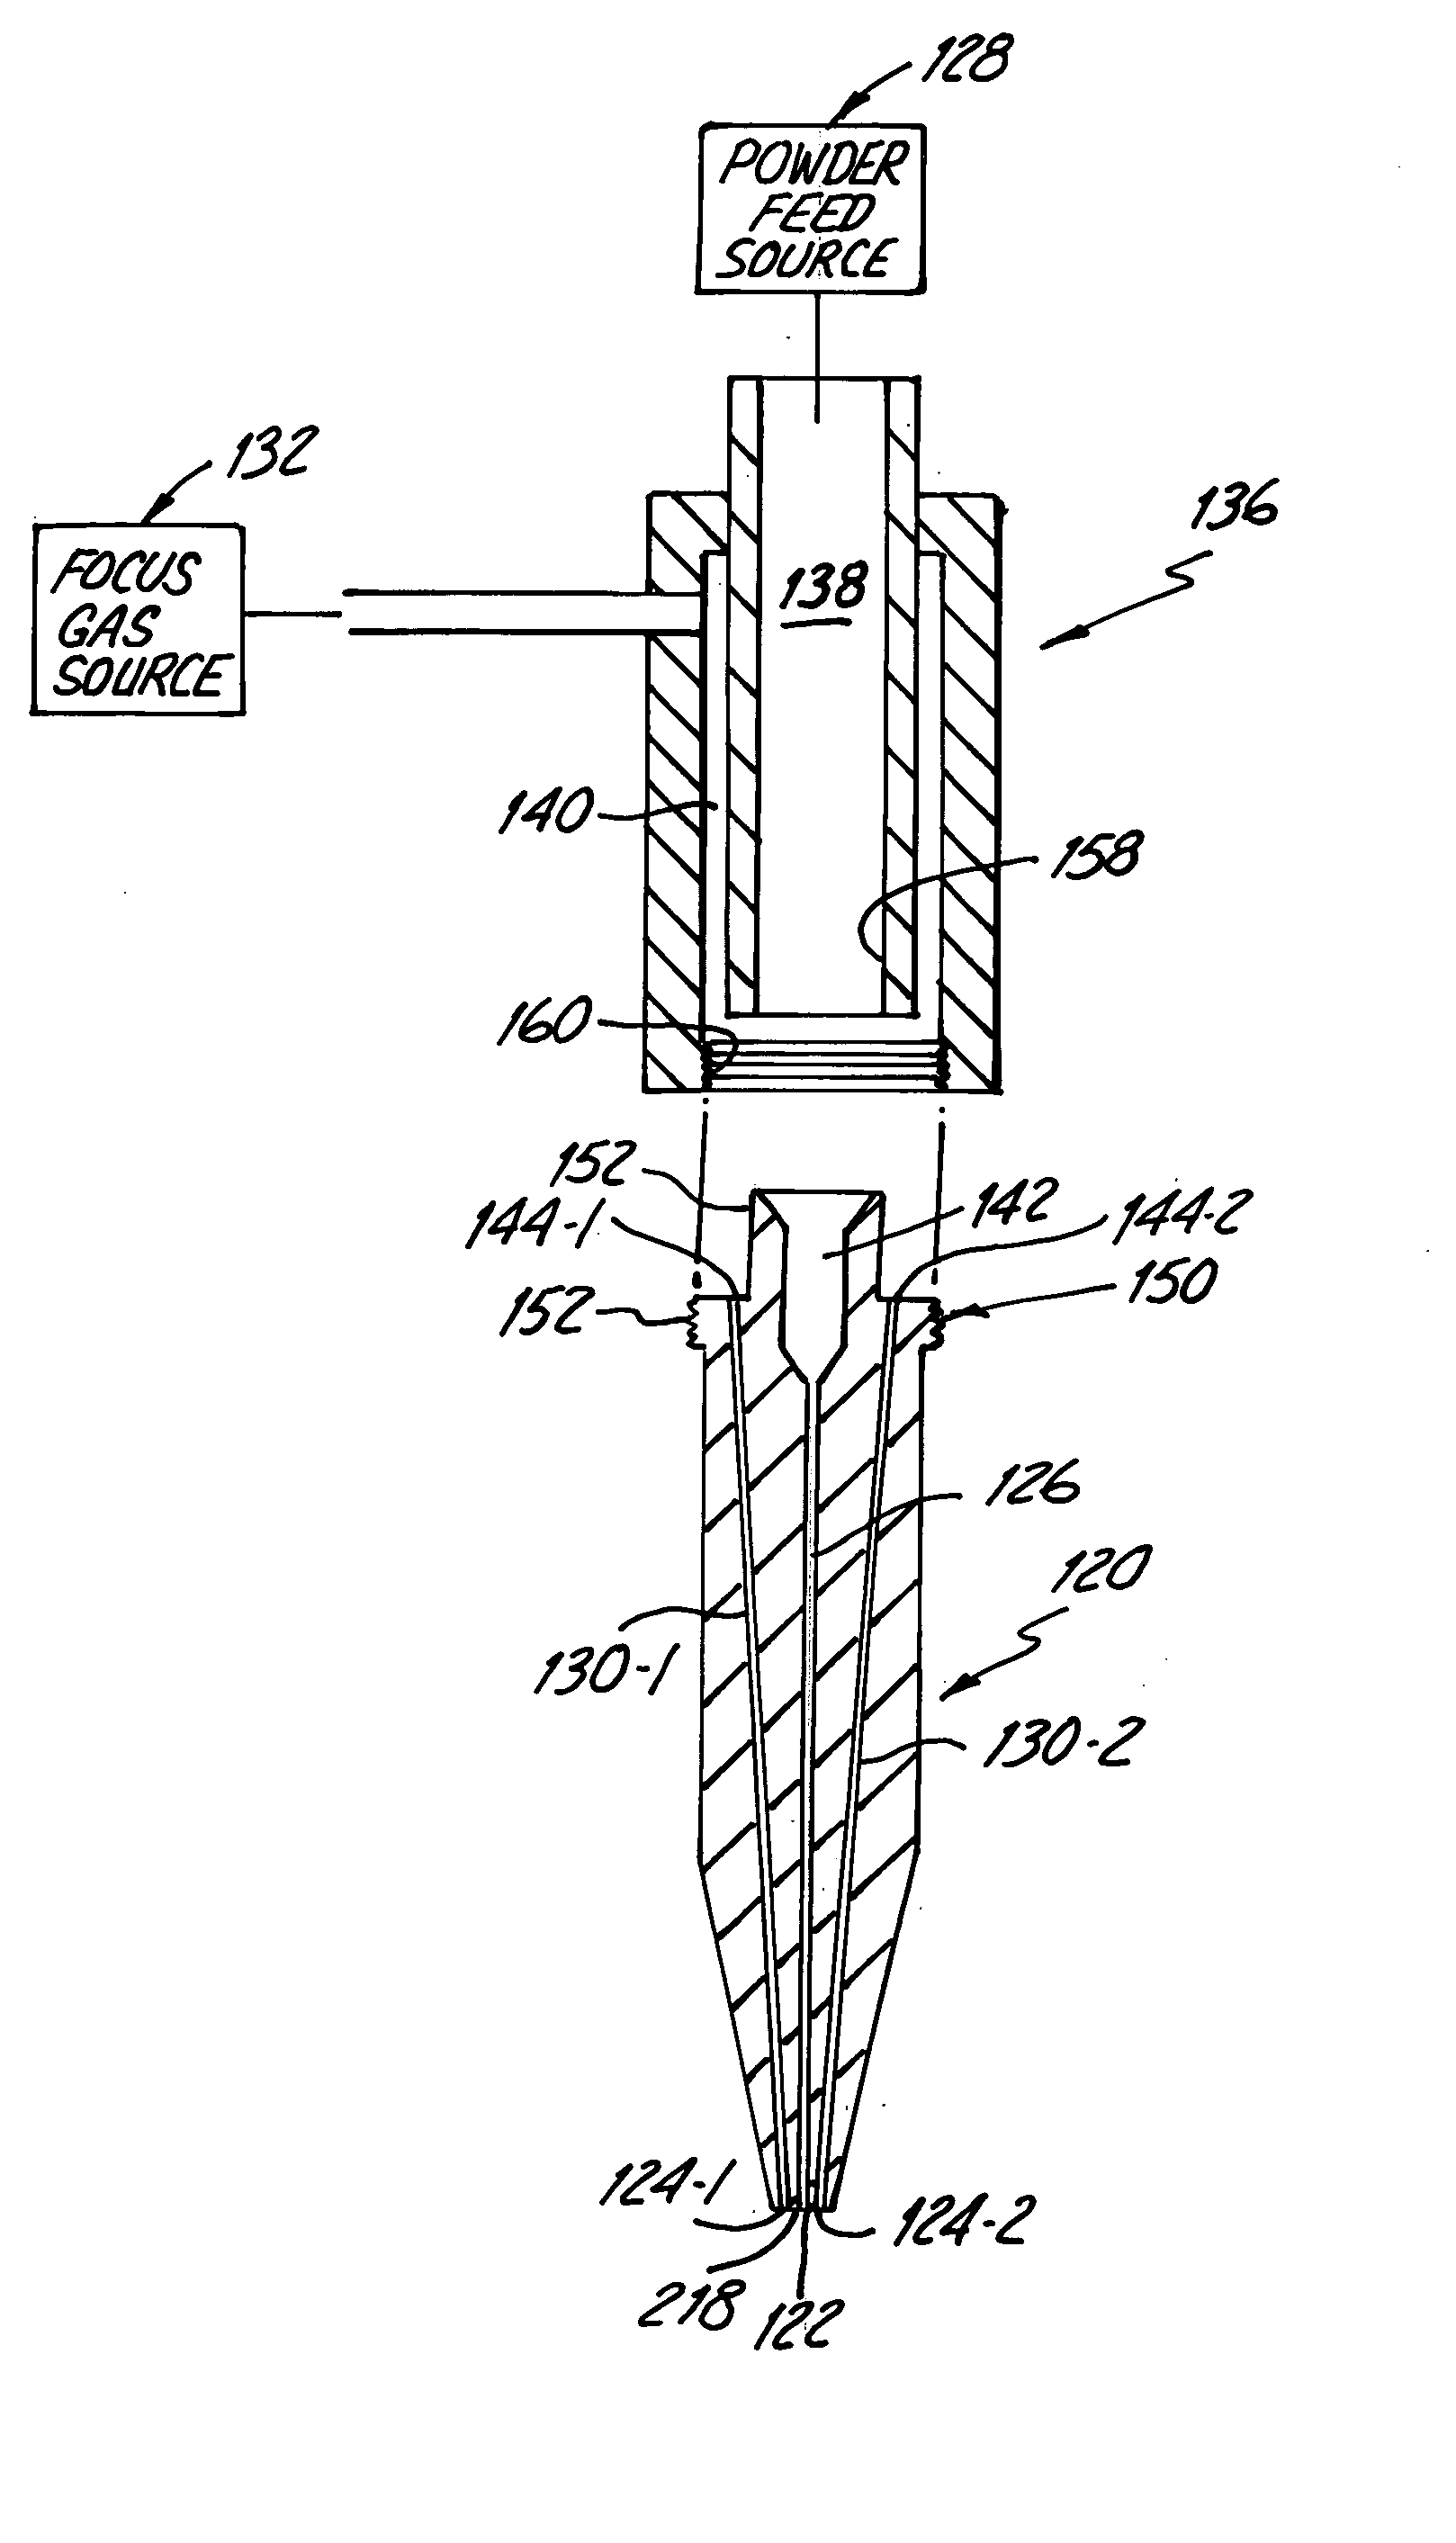 Powder feed nozzle for laser welding